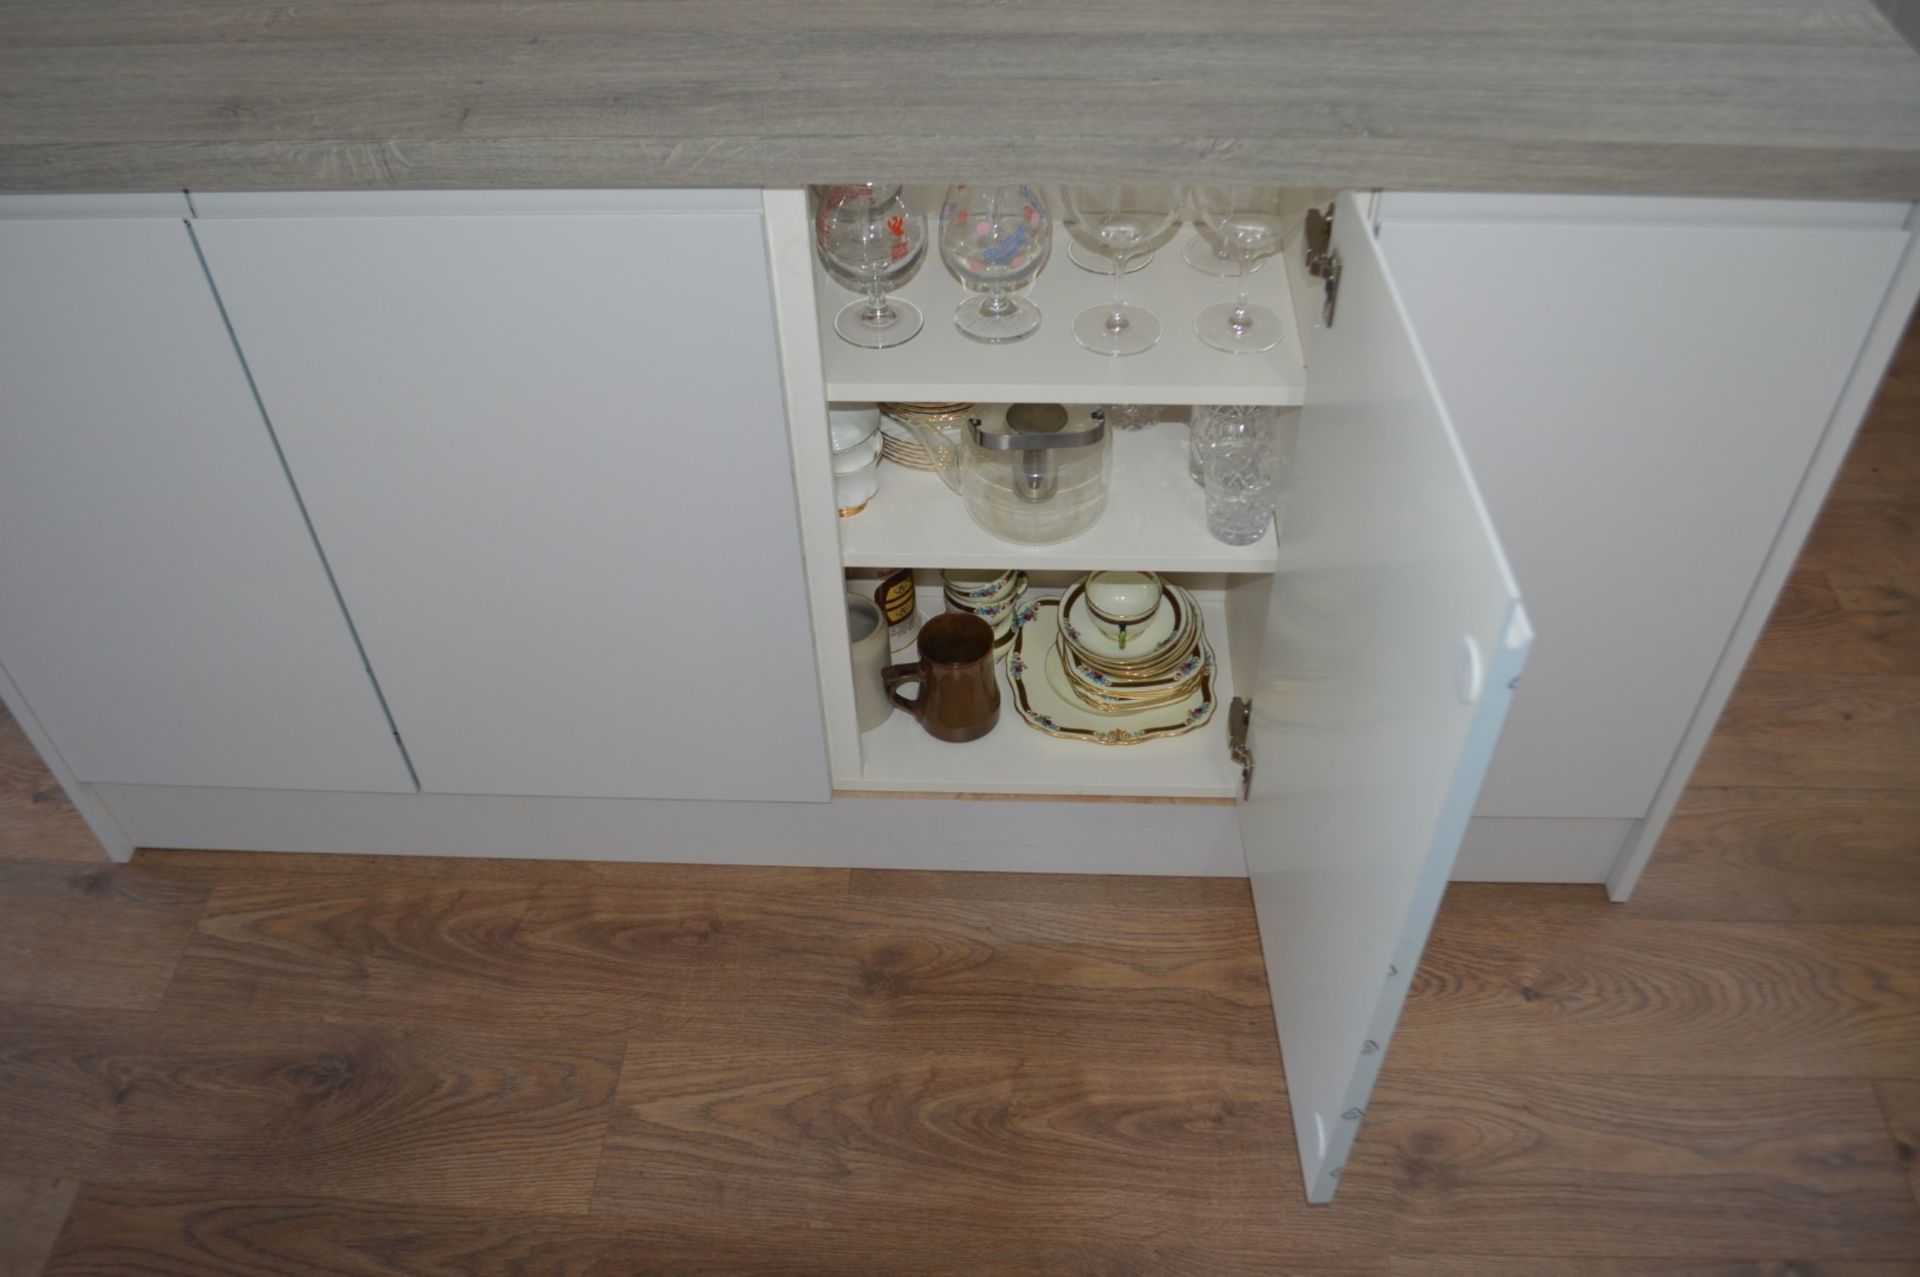 1 x Contemporary Handleless Fitted Kitchen Featuring A White Finish, Laminate Worktops, And - Image 24 of 28